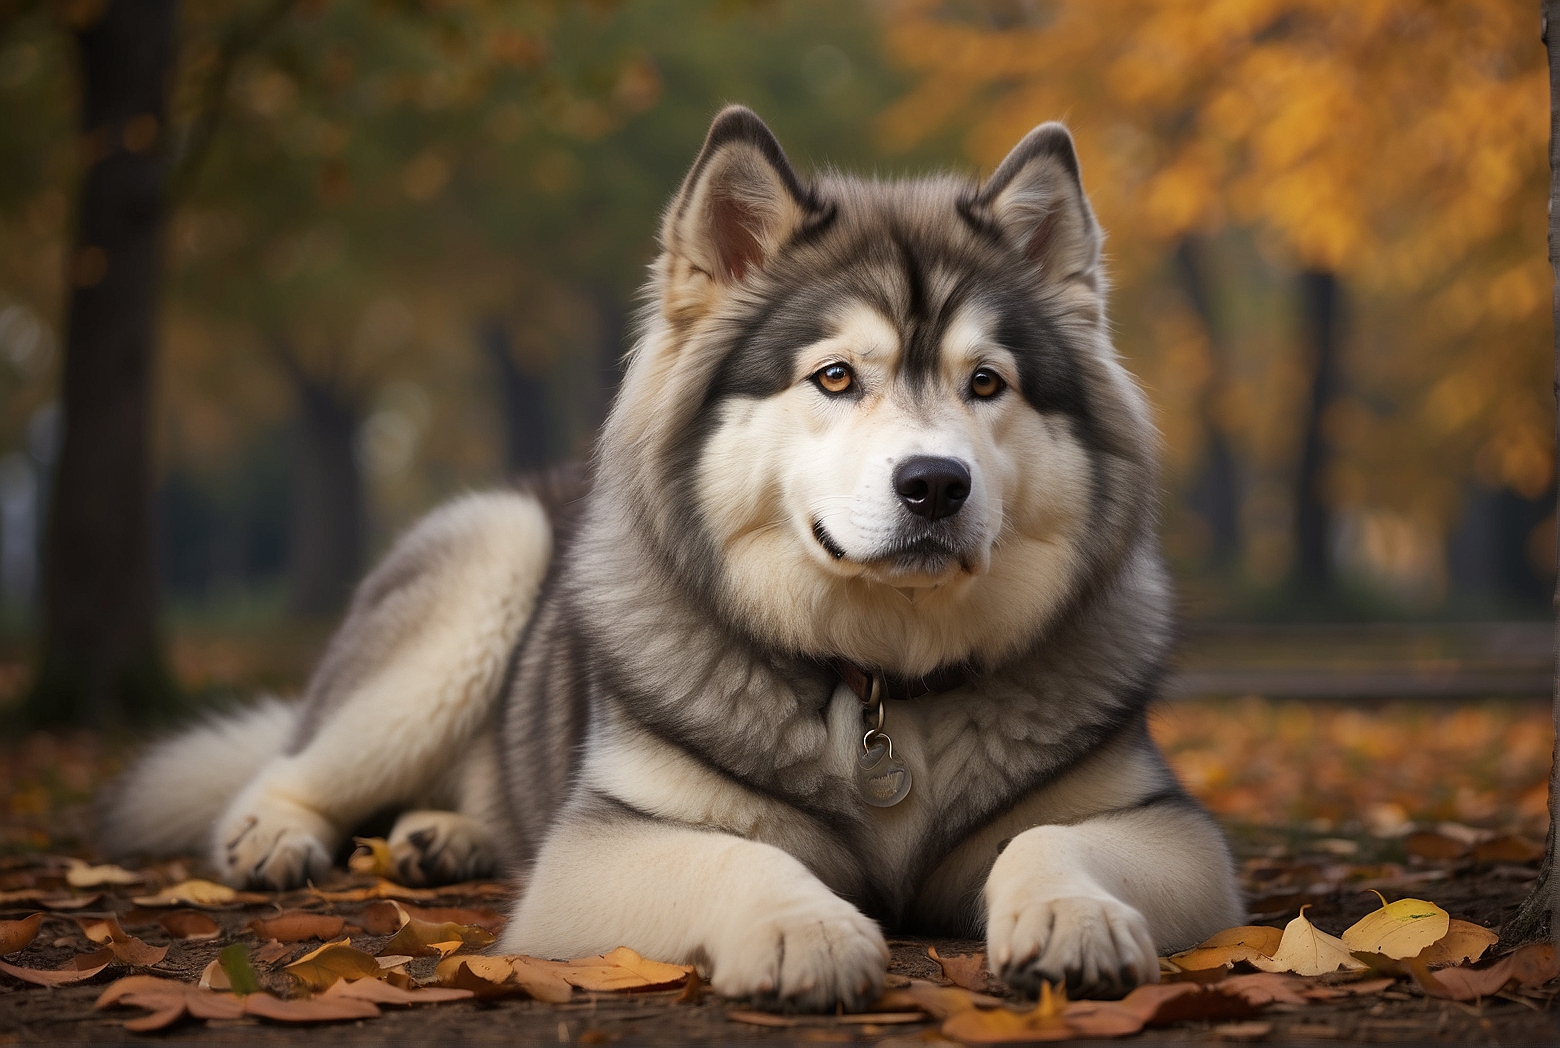 What is the best diet for an Alaskan Malamute?